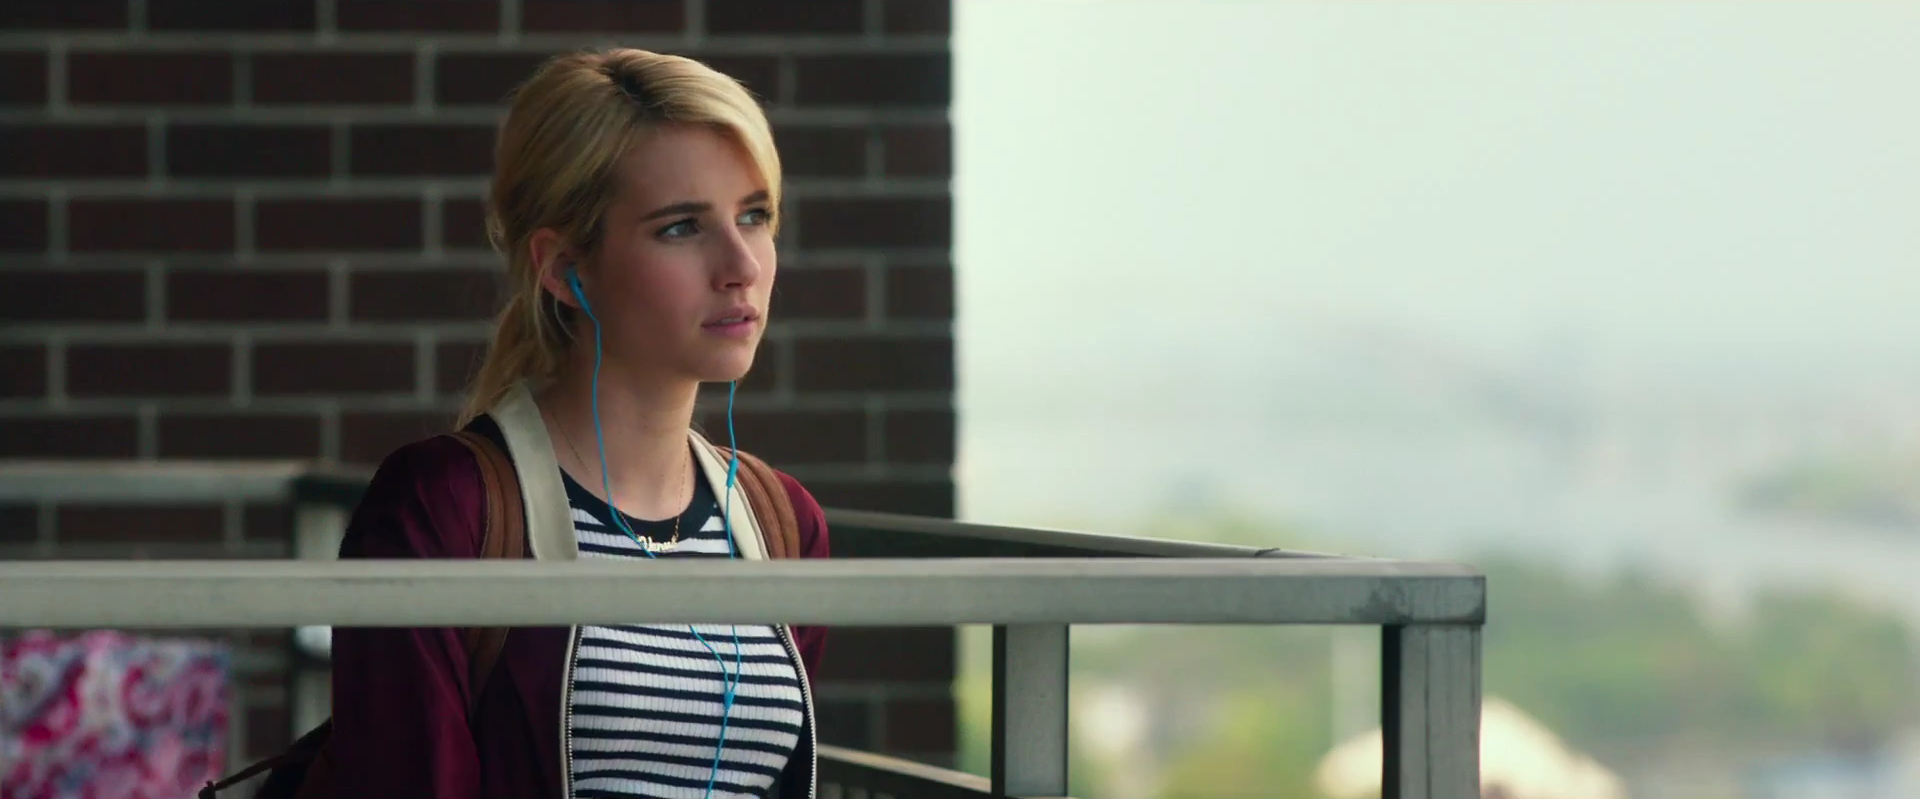 Nerve streaming: where to watch movie online?